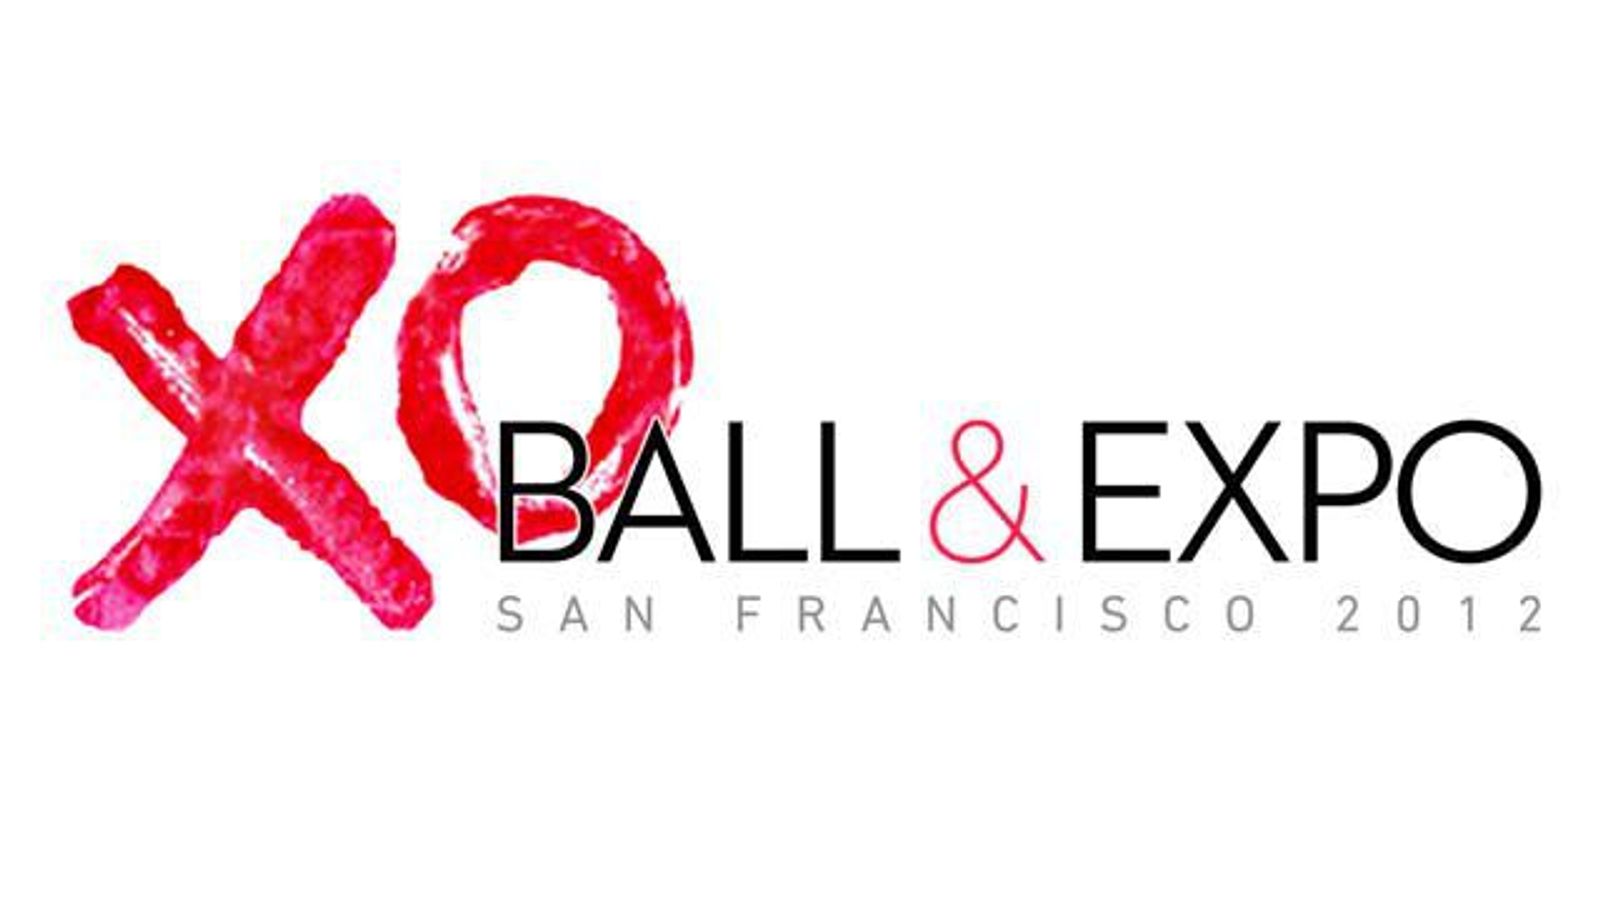 XO Ball & Expo SF to Feature Famed Drag Queen Raja